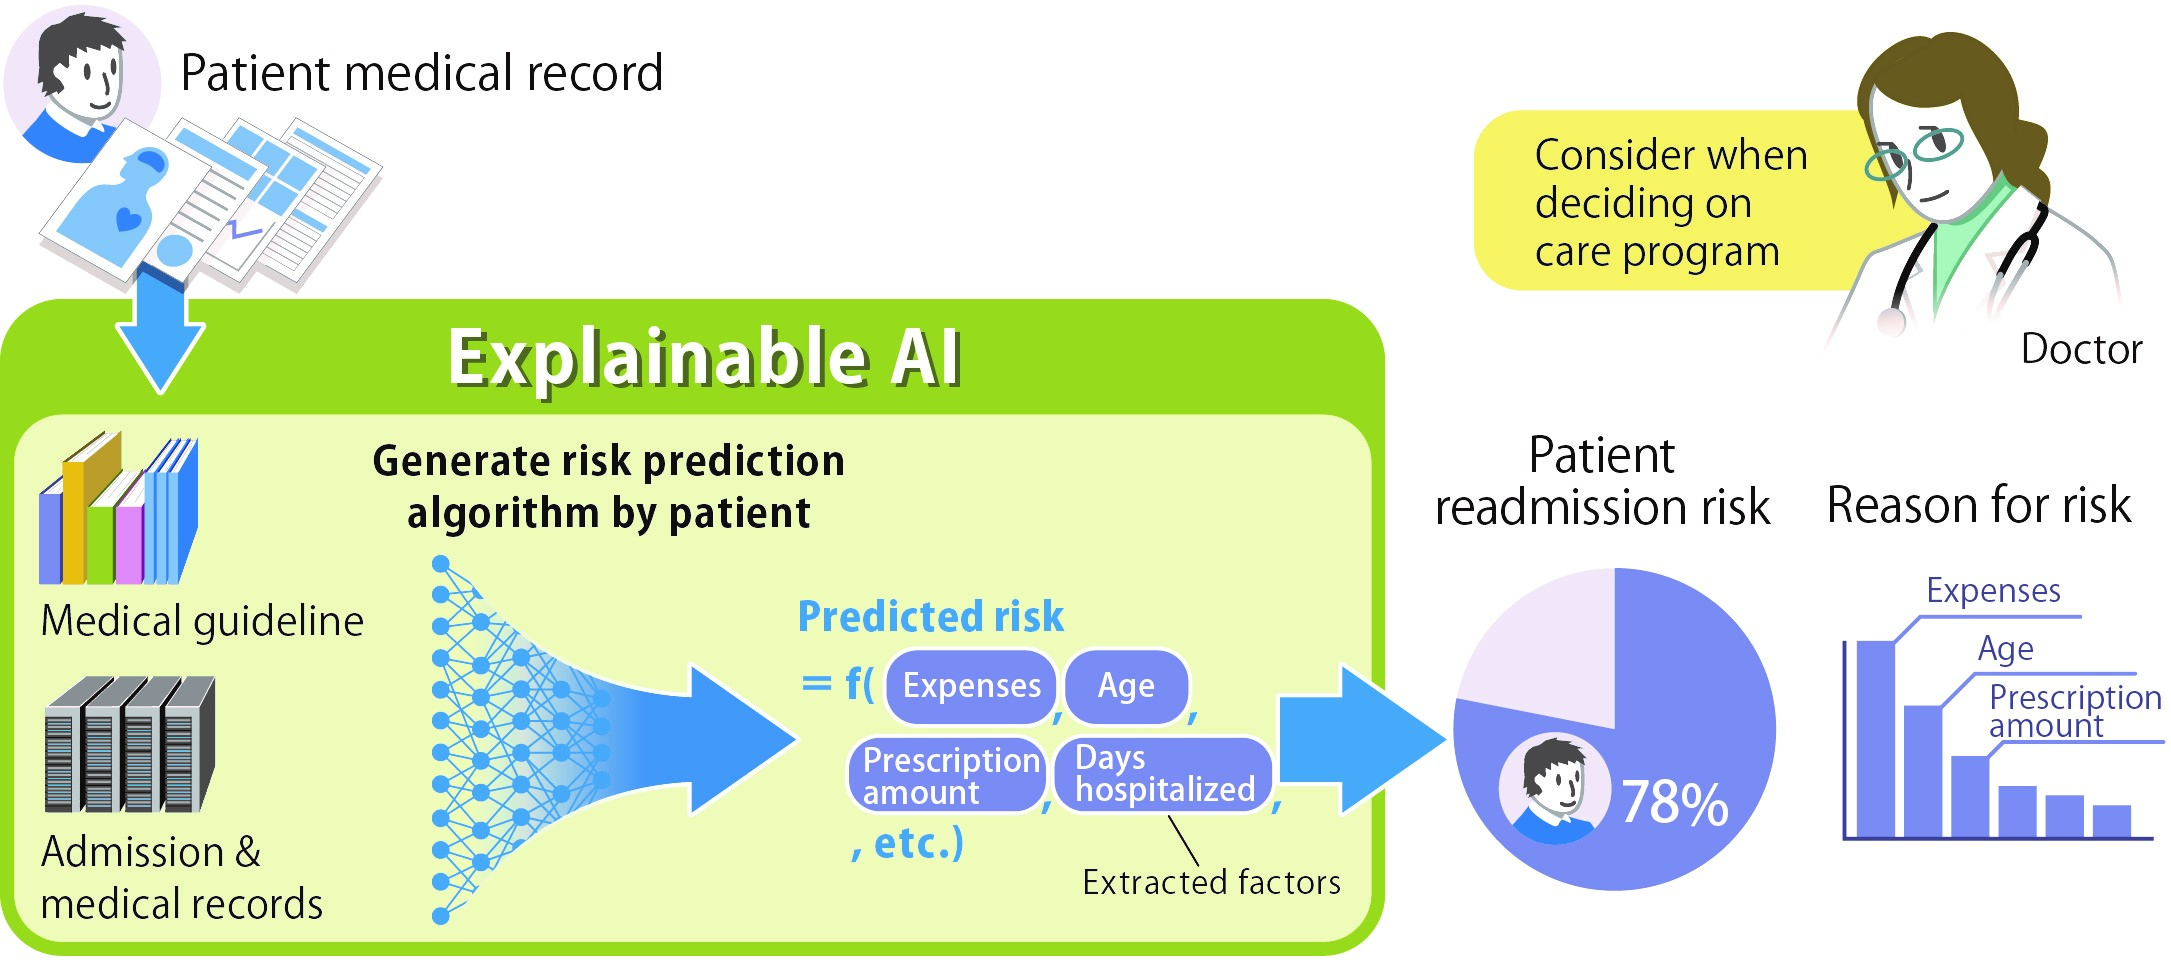 Example use situation/case of this AI technology in predicting readmission risk